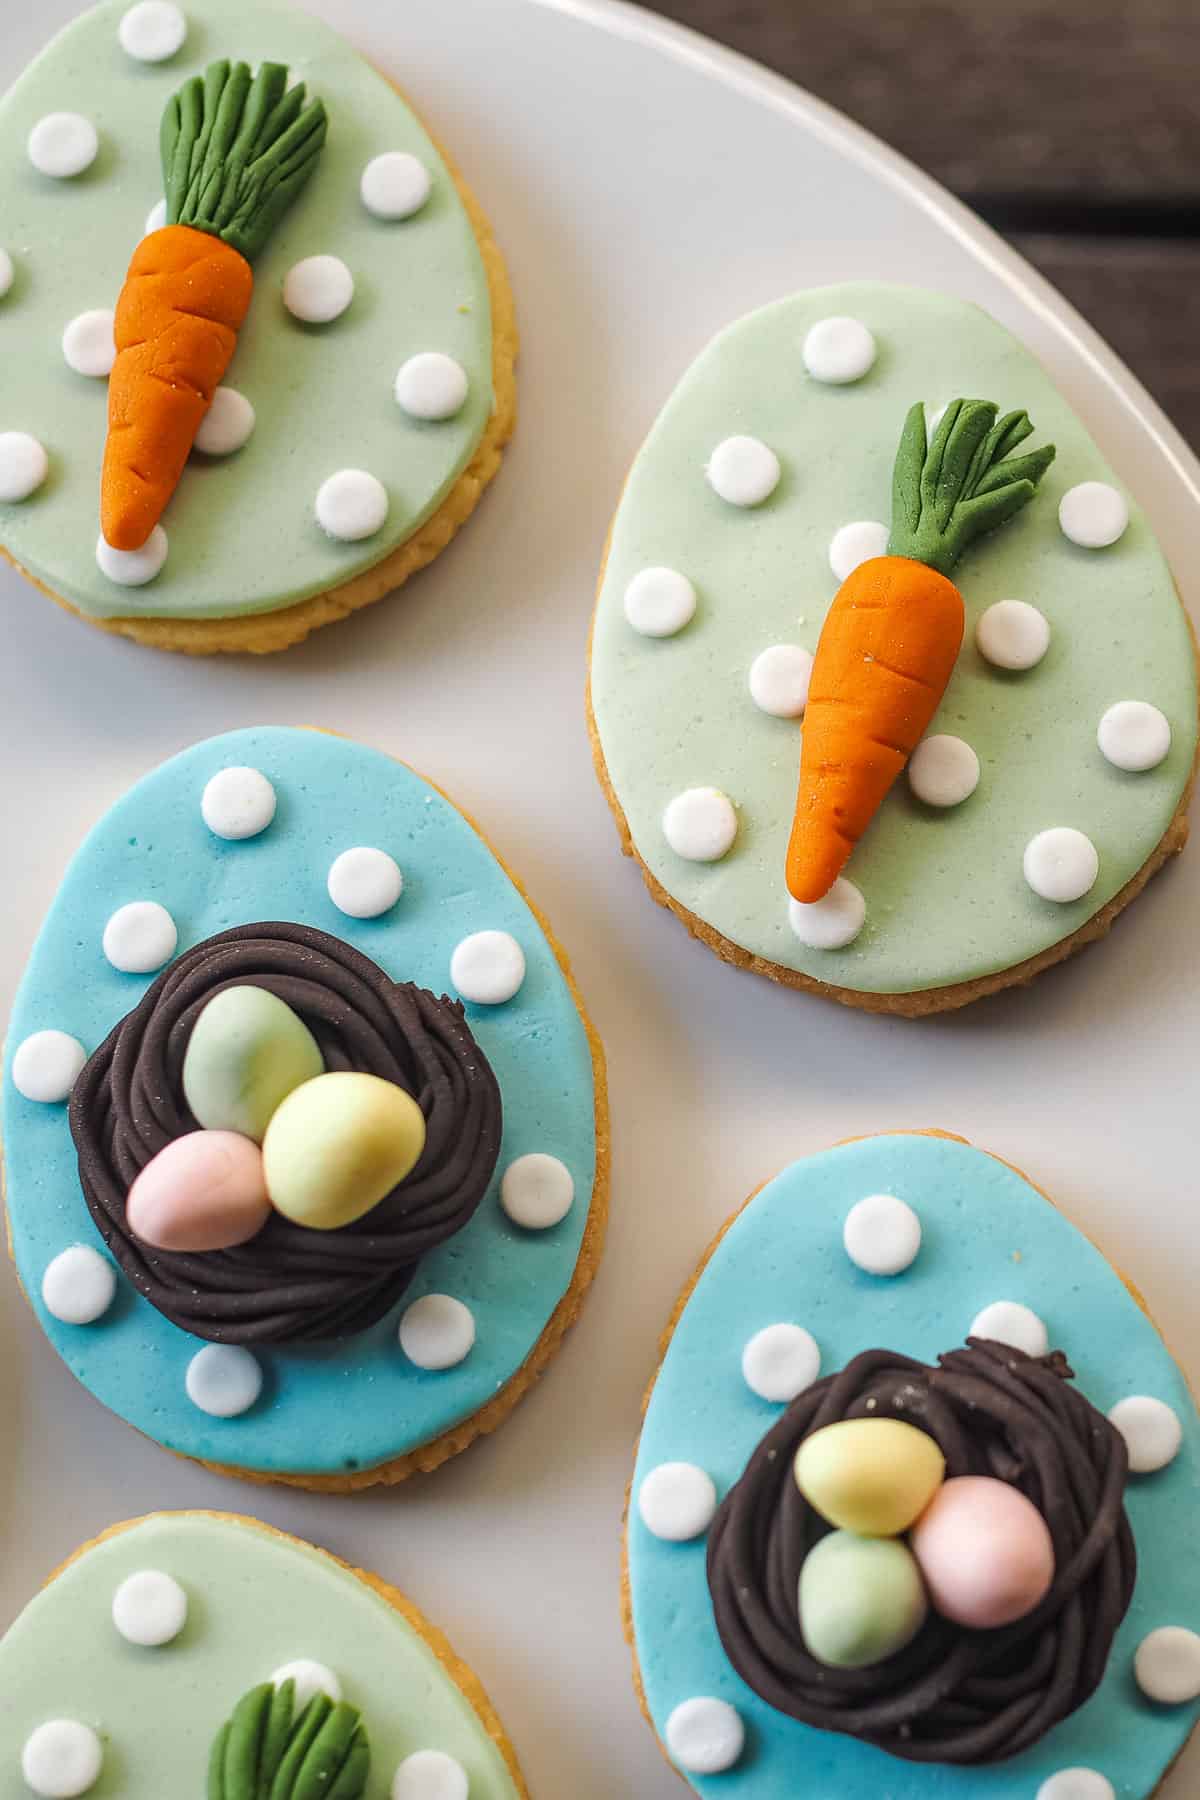 Egg shaped cookies in blue with 3D bird nest and 3 fondant eggs and egg shaped cookies in green with fondant carrot toppers.